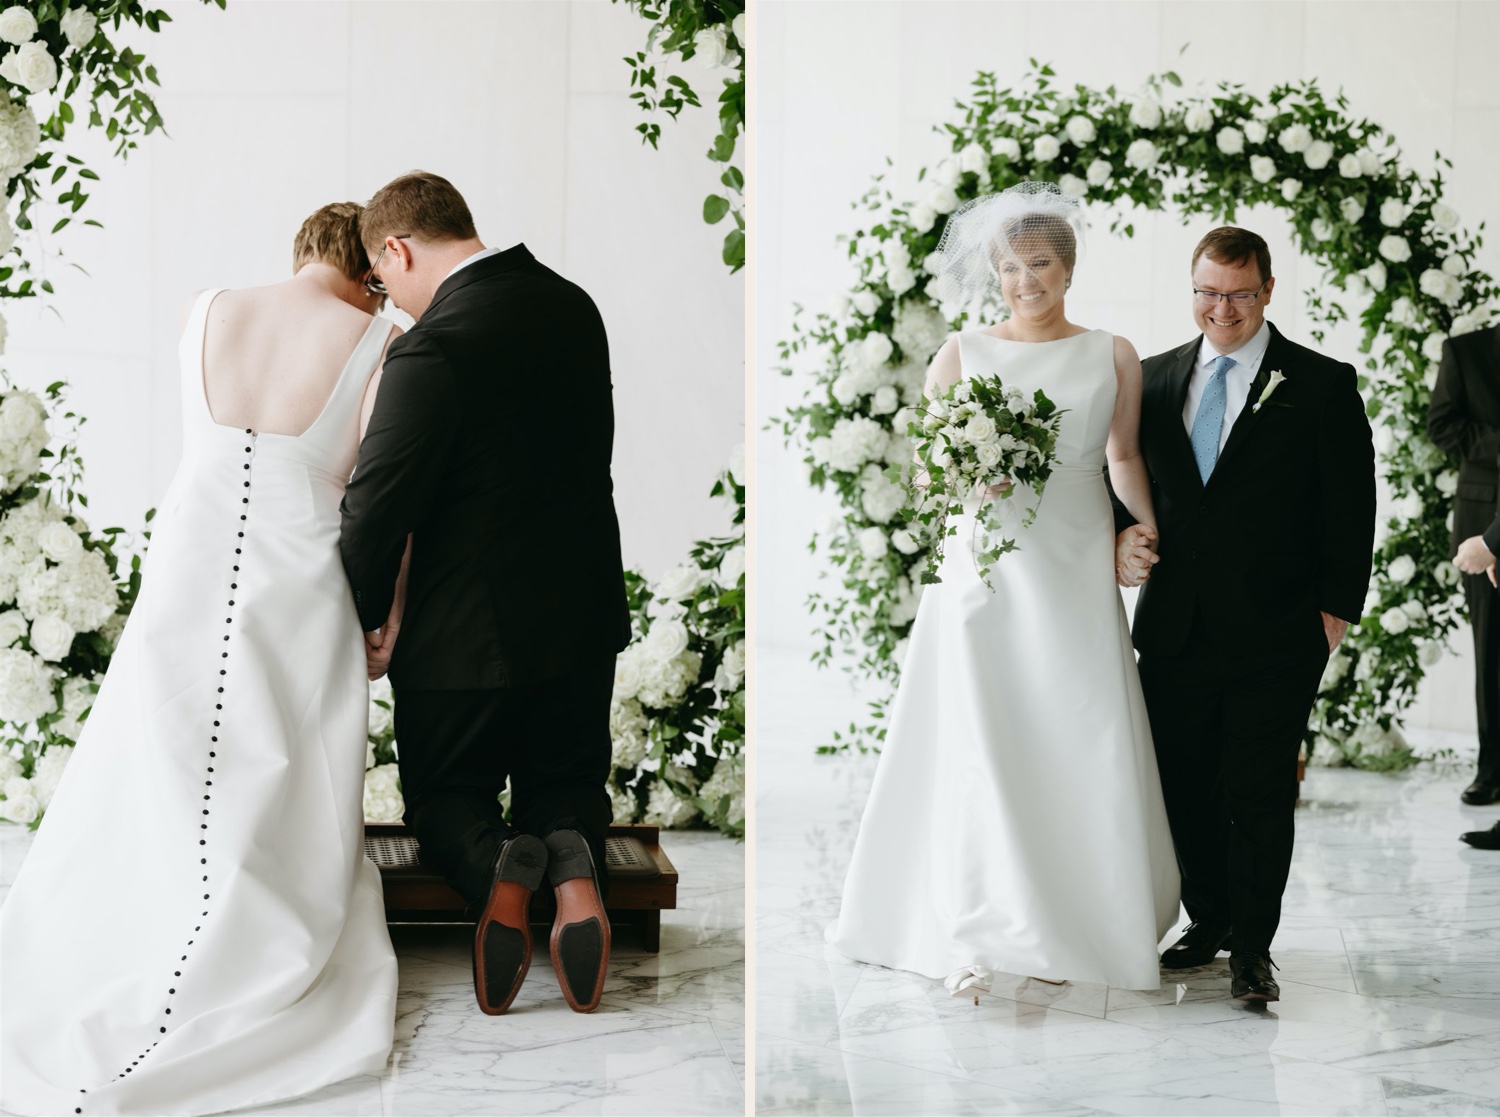 bride and groom ceremony details floral arch